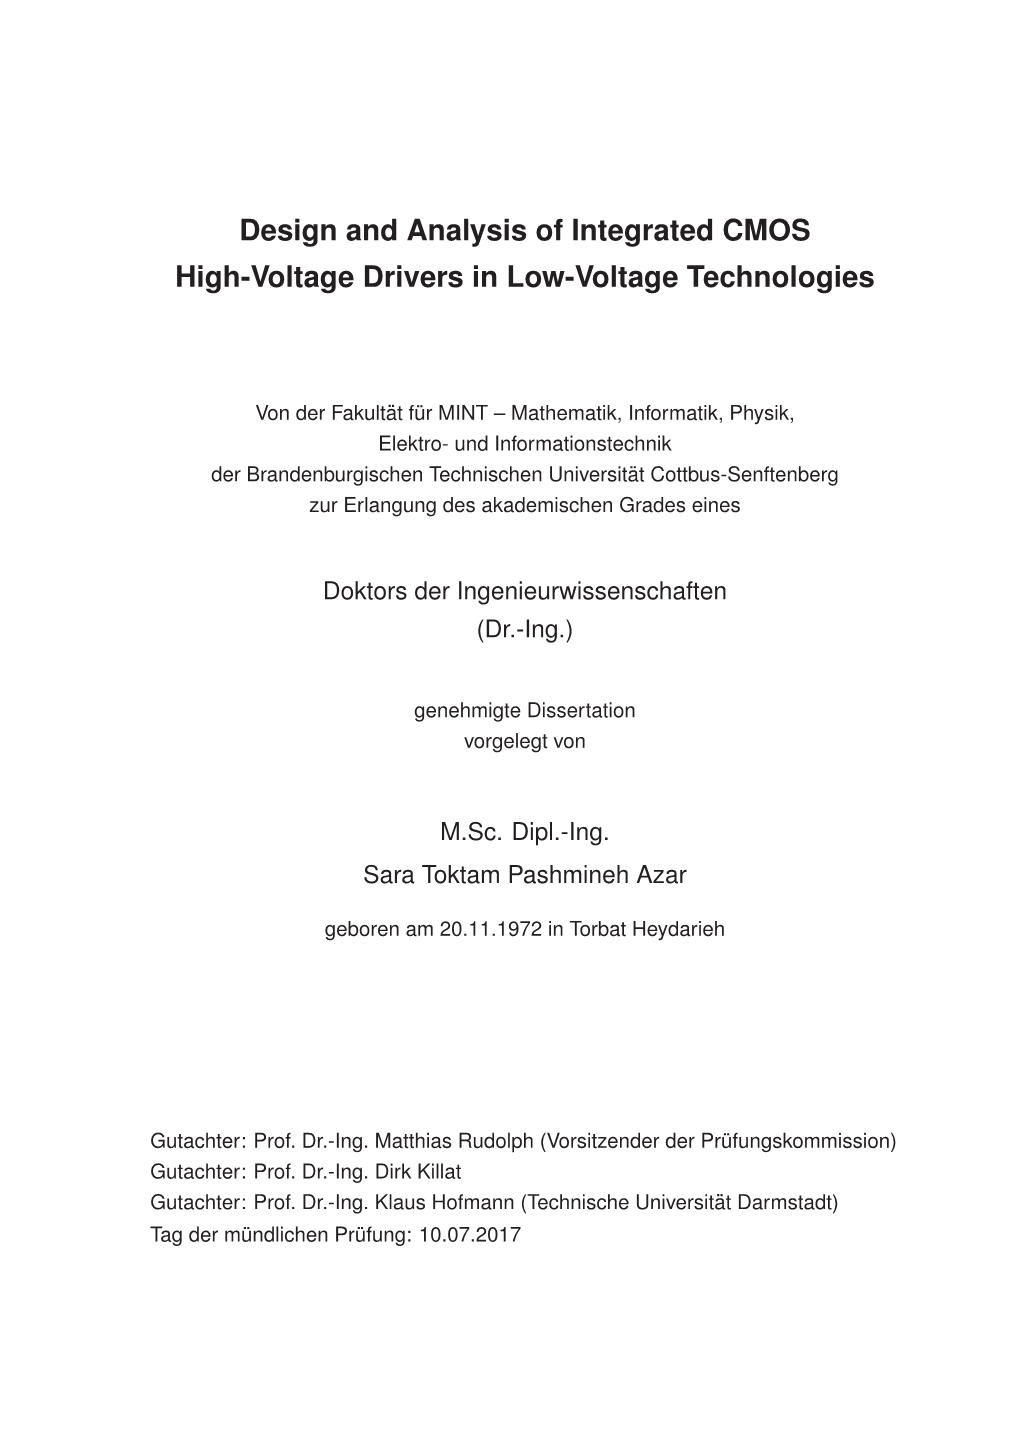 Design and Analysis of Integrated CMOS High-Voltage Drivers in Low-Voltage Technologies